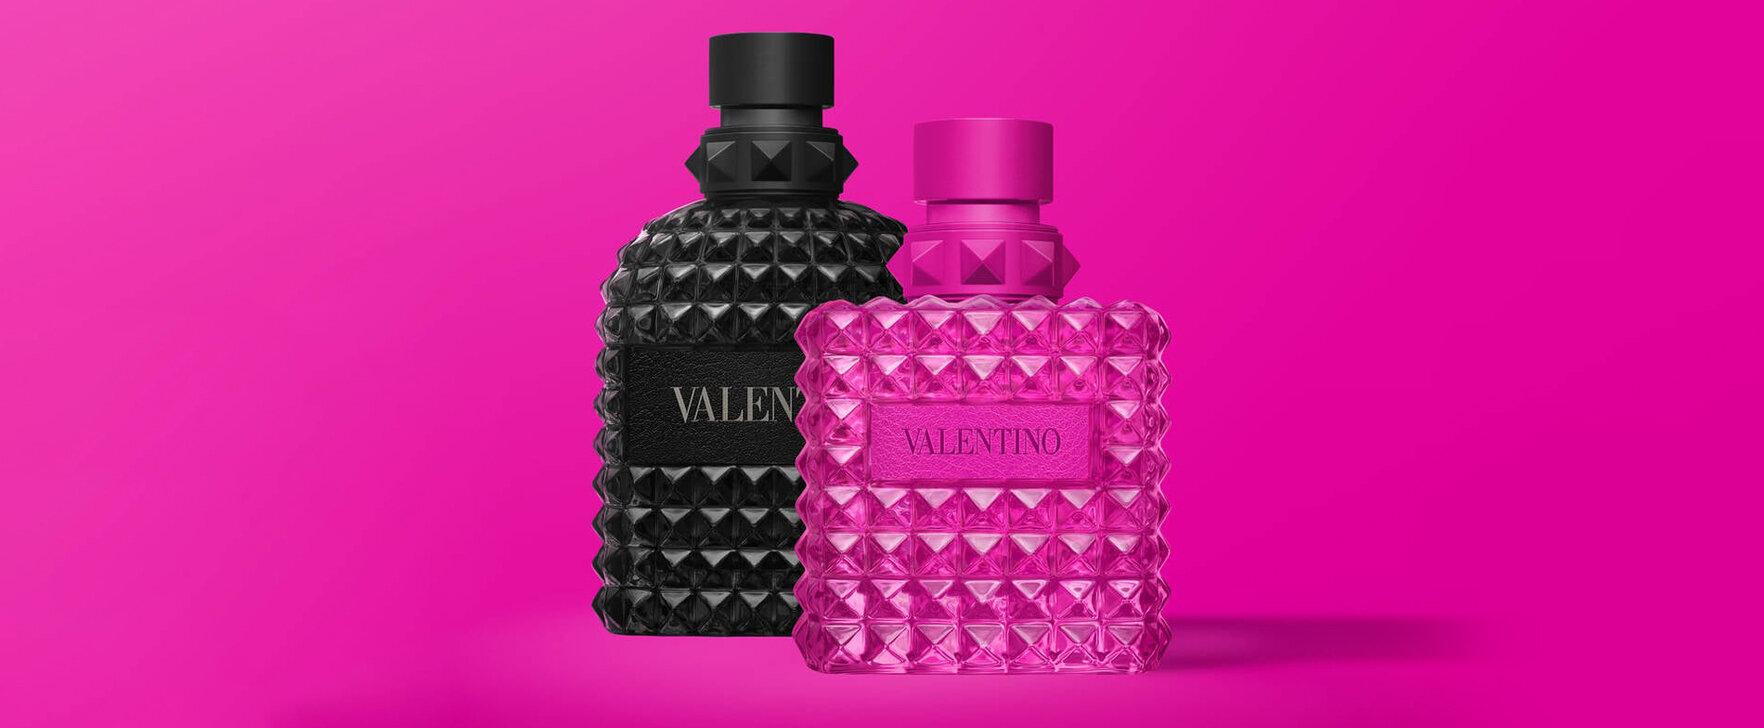 "Valentino Donna Born in Roma Pink PP", "Valentino Uomo Born in Roma Rockstud Noir": The New Limited Edition Fragrance Duo From Valentino